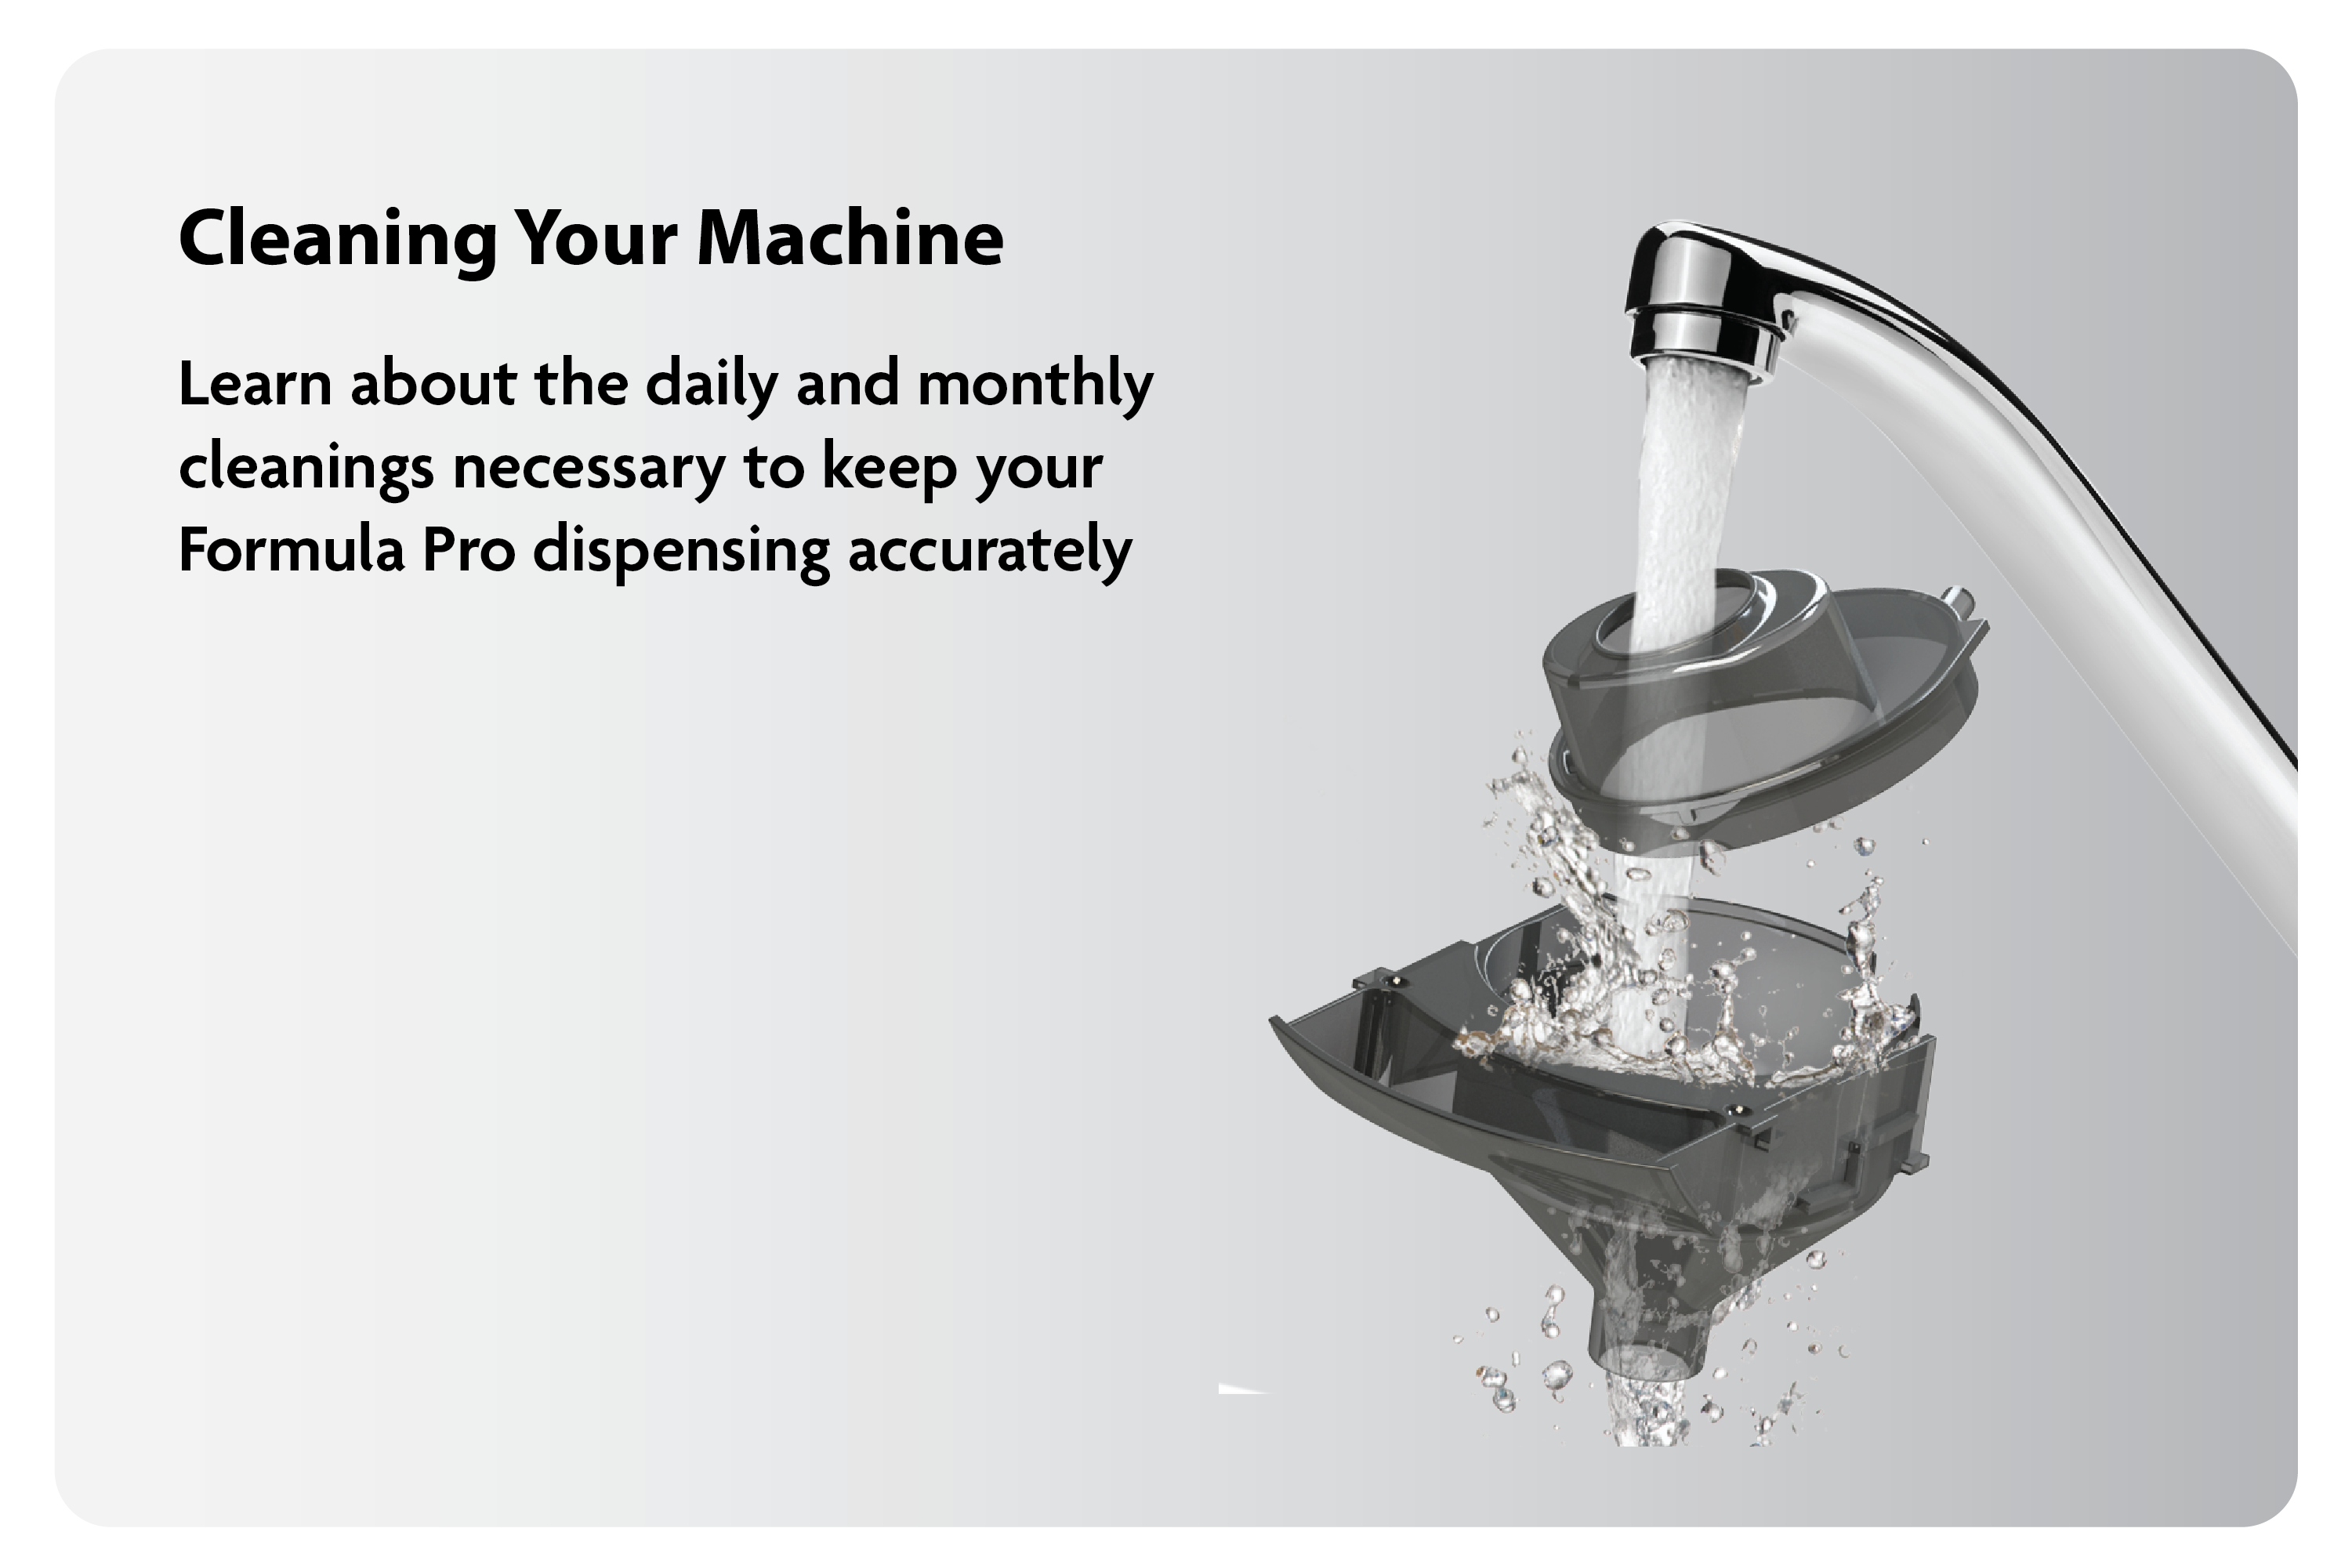 Cleaning Your Machine: Learn about the daily and monthly cleanings necessary to keep your Formula Pro dispensing accurately